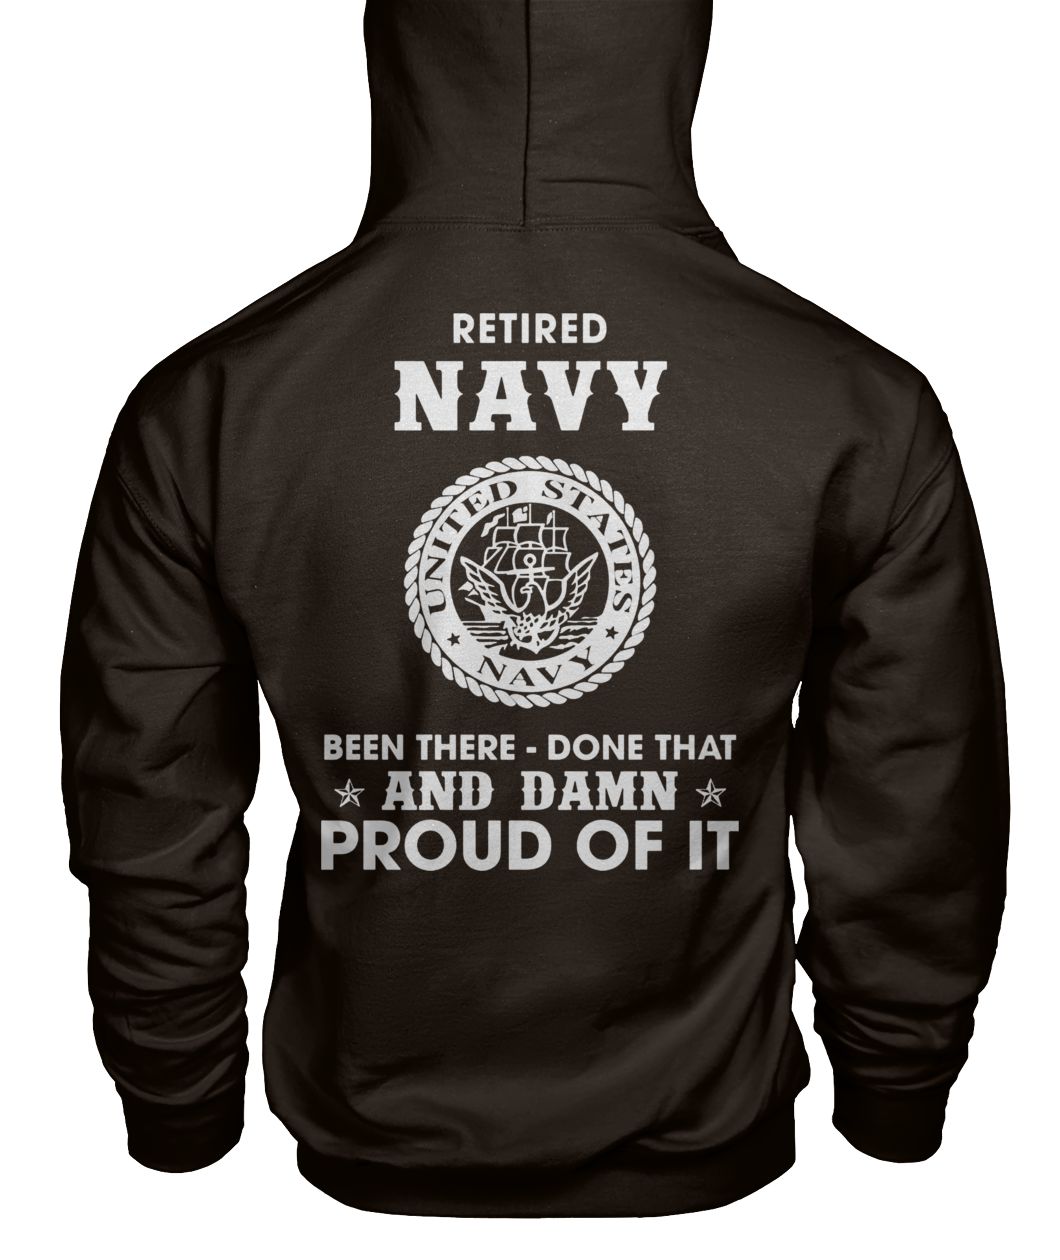 Retired navy been there done that and damn proud of it gildan hoodie